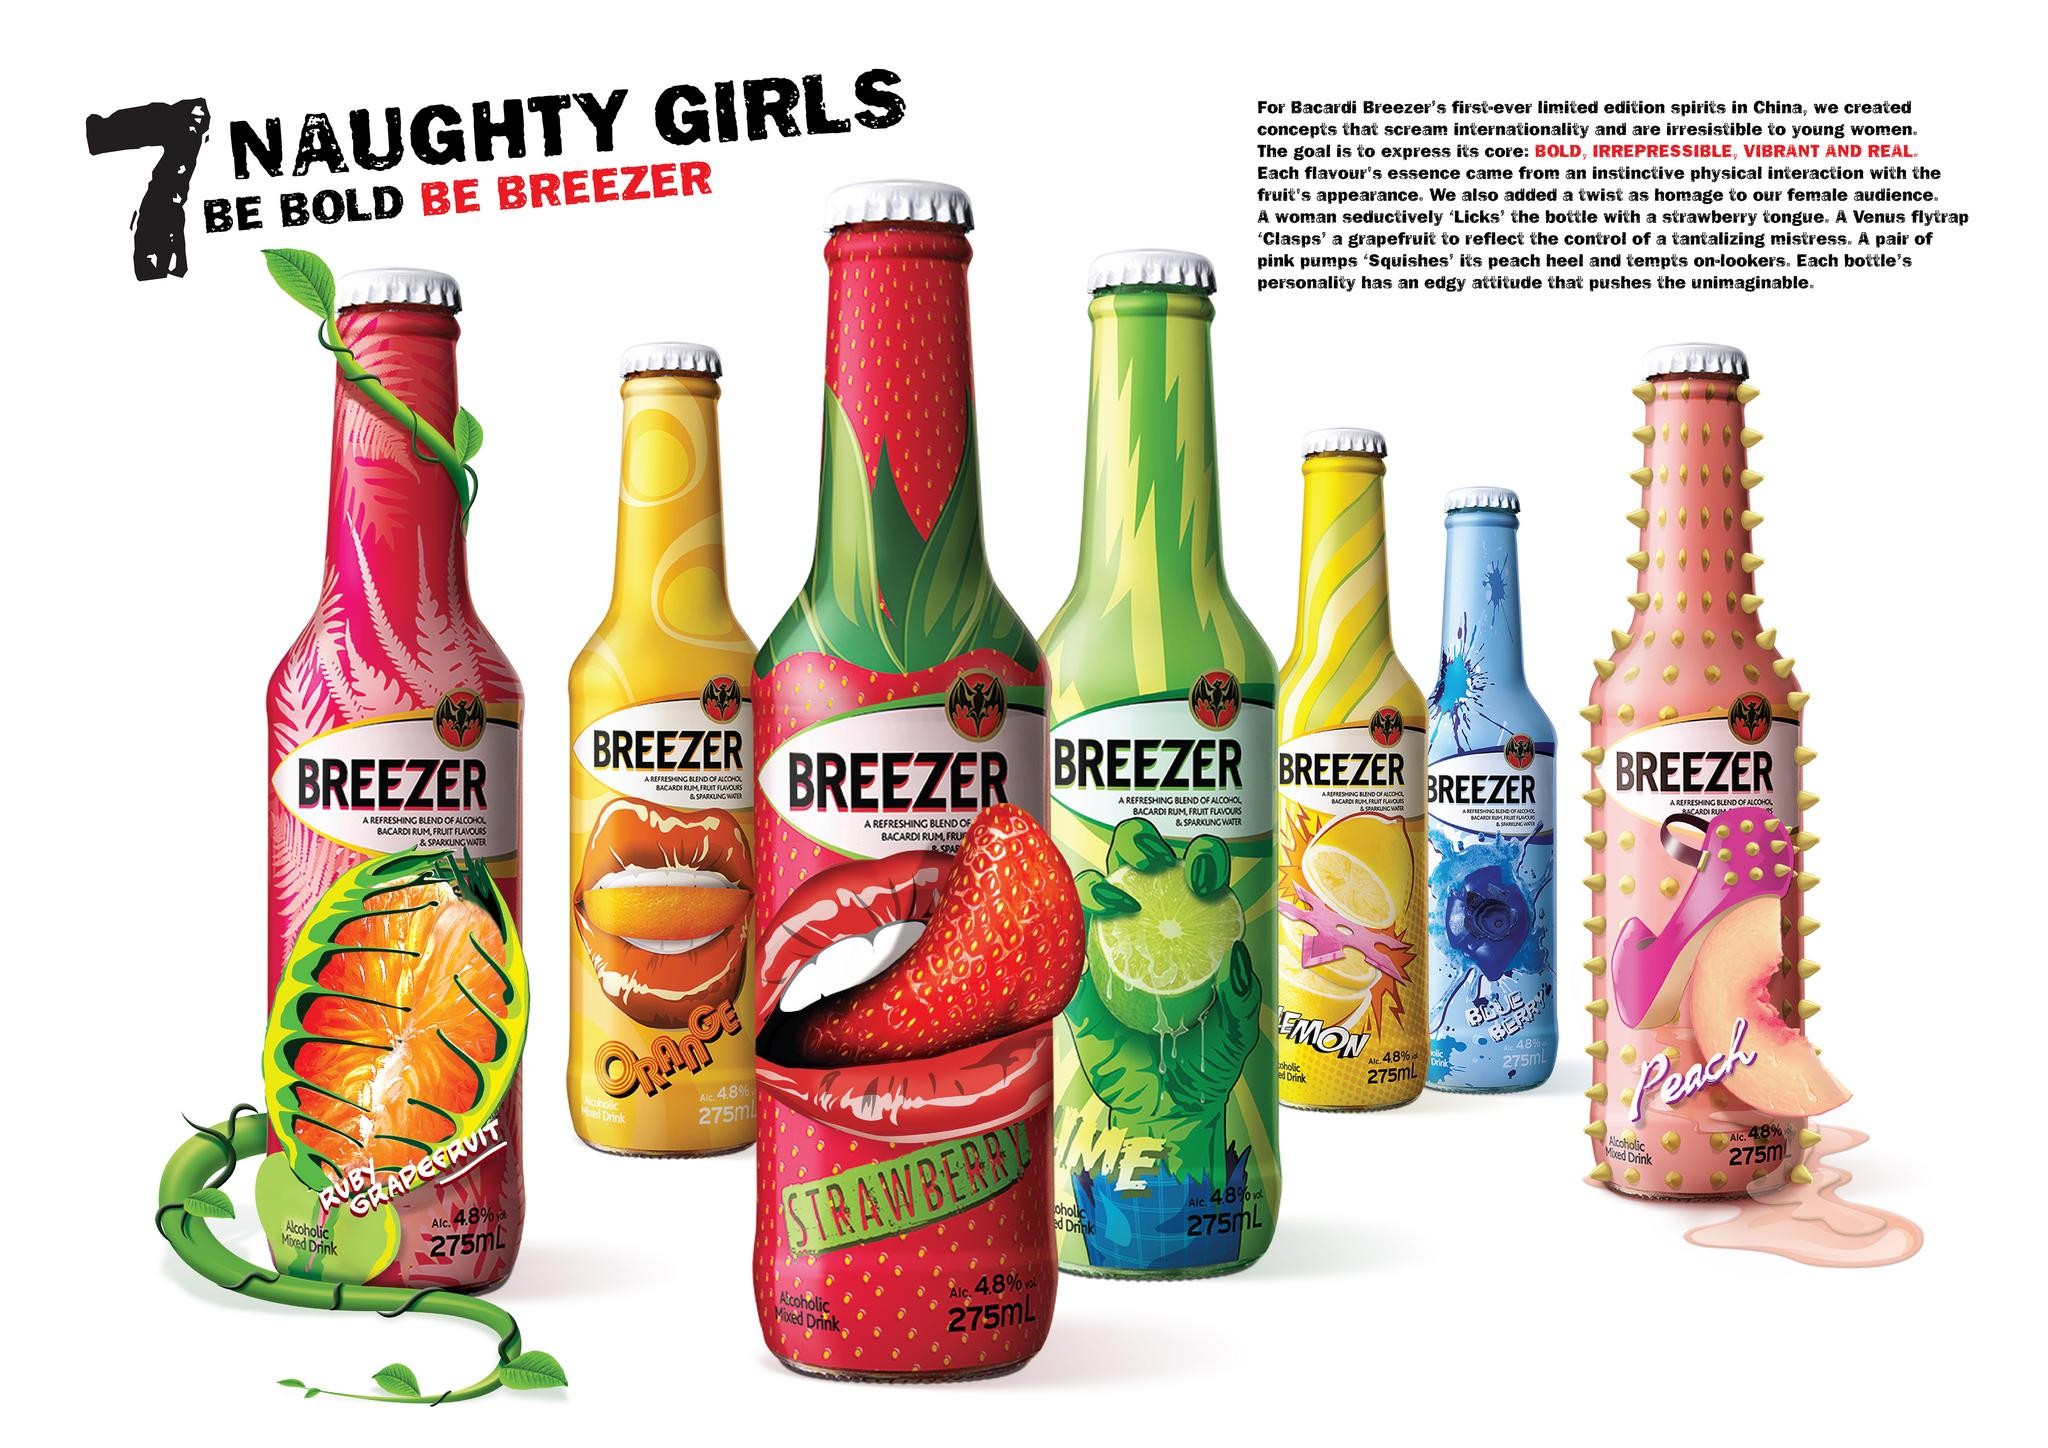 BREEZER FIRST-EVER LIMITED EDITION